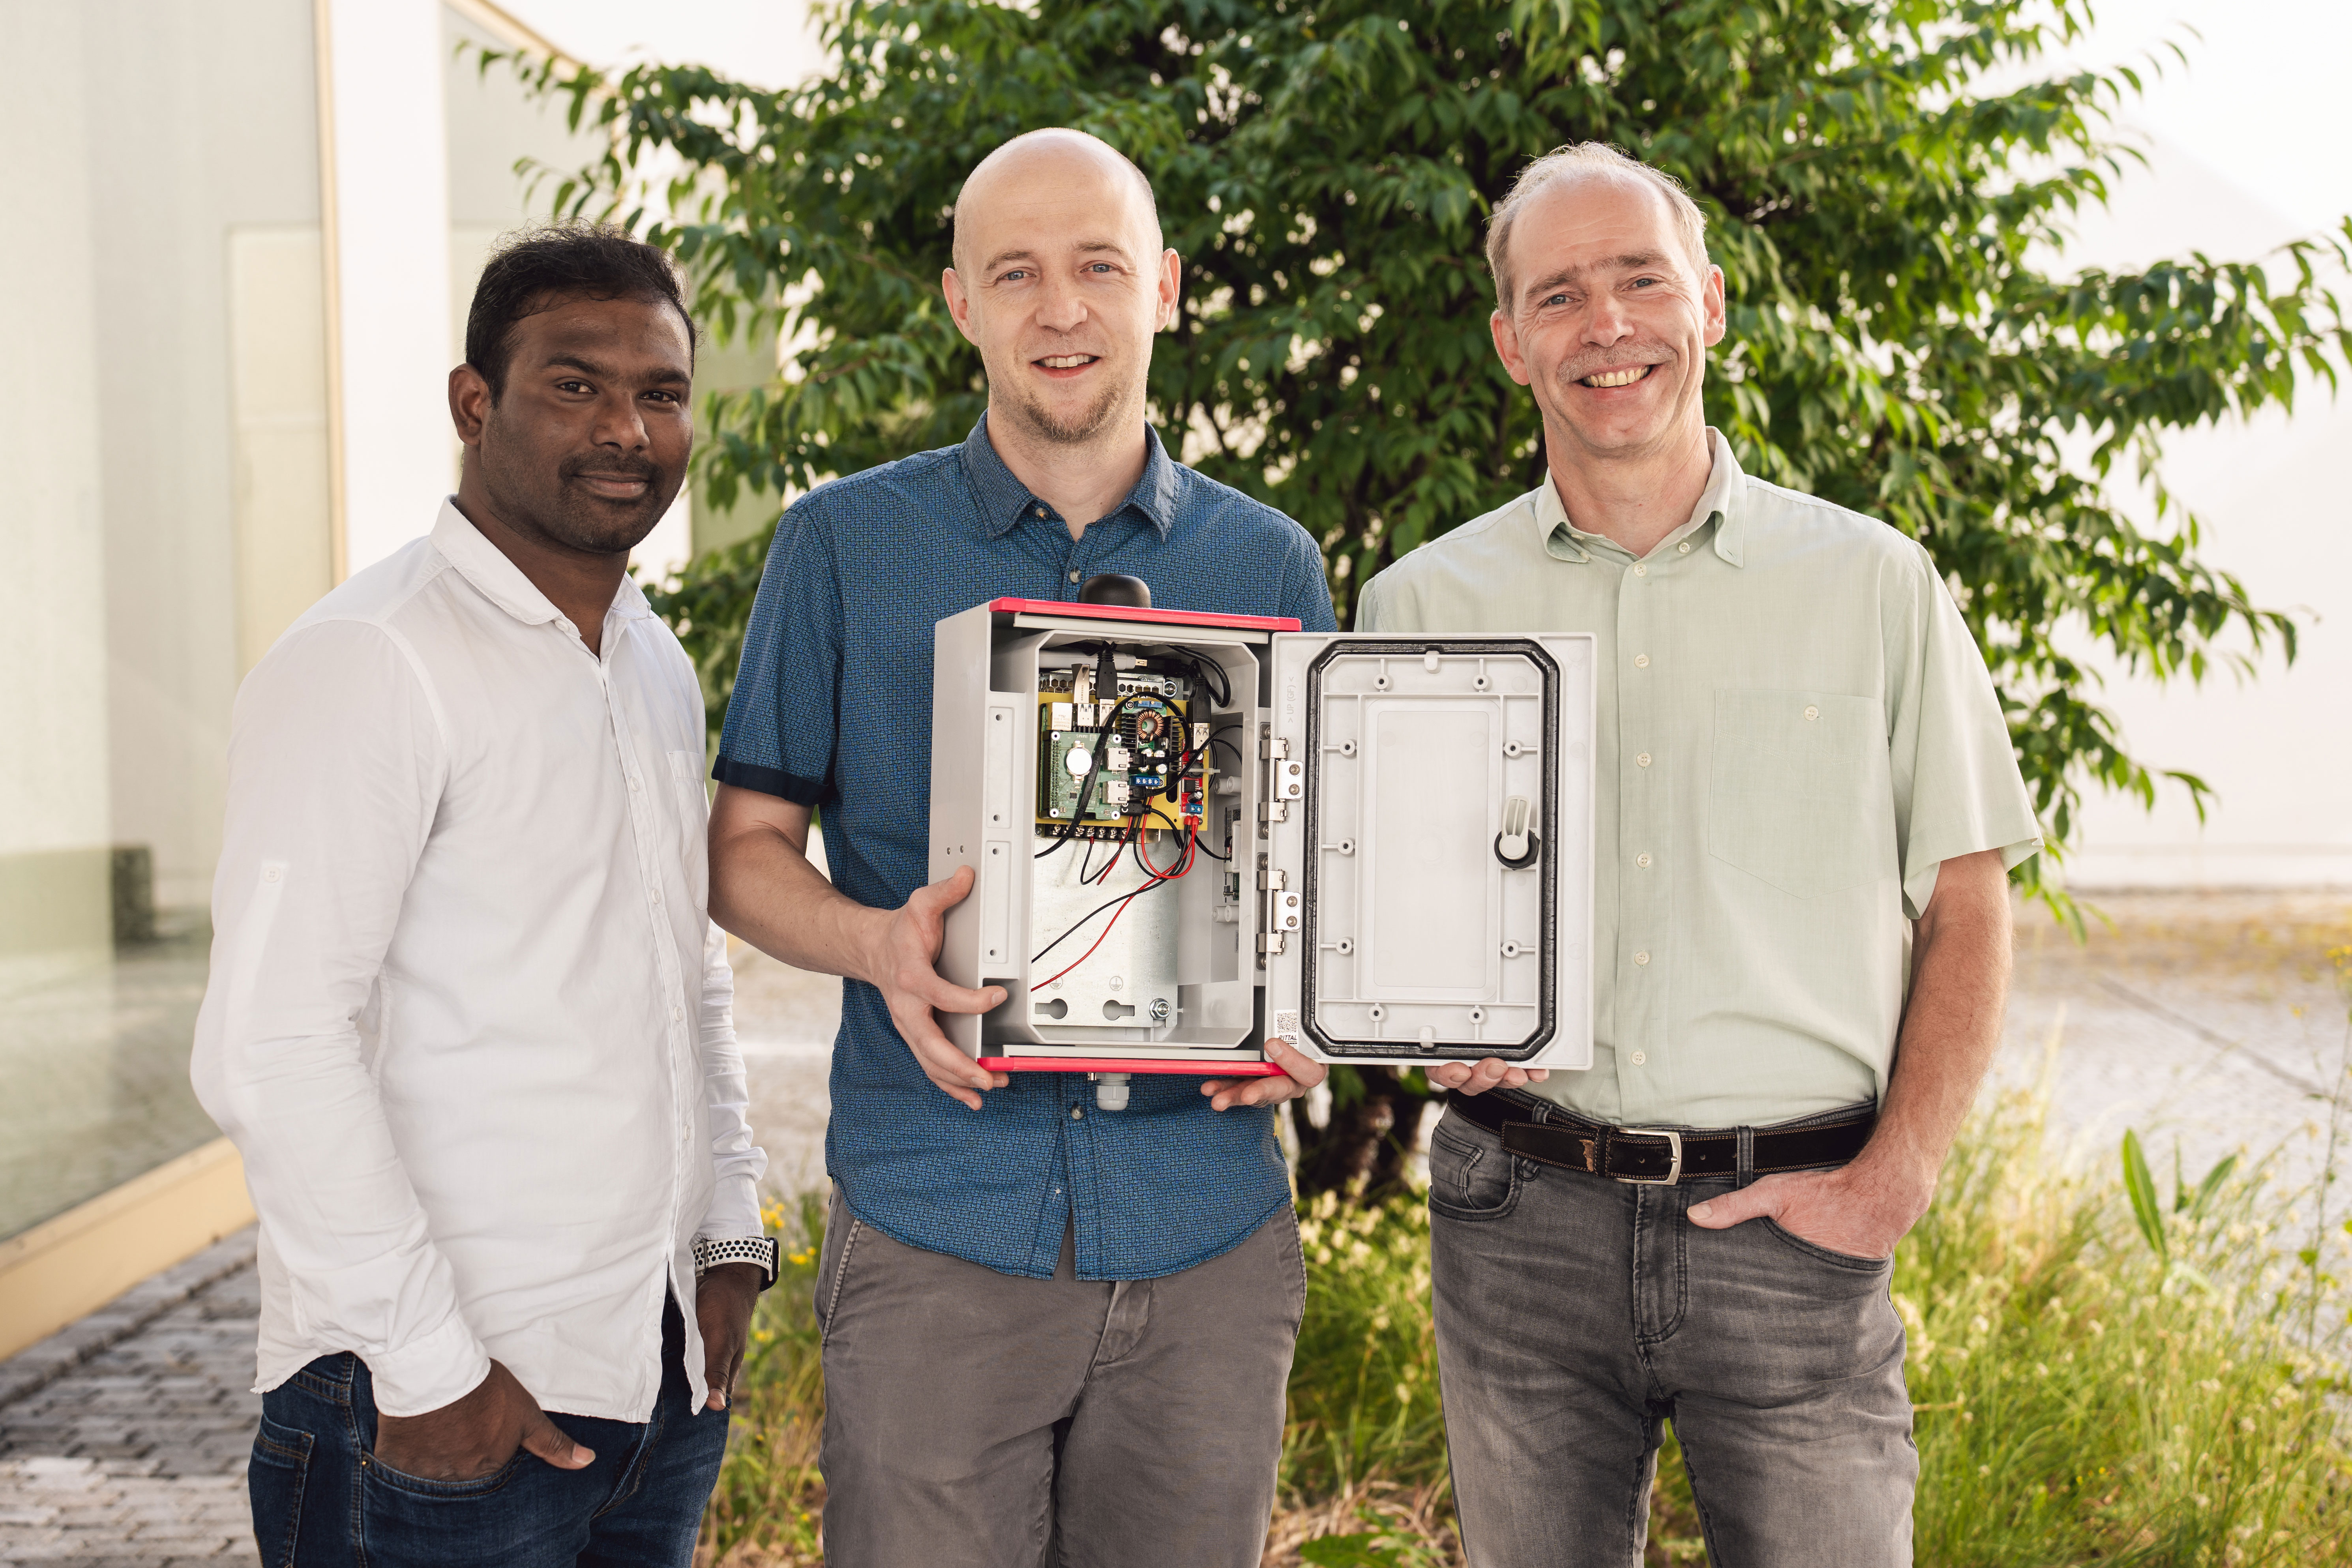 Image shows the developers from Fraunhofer IDMT and IMMS who designed the sensor boxes.